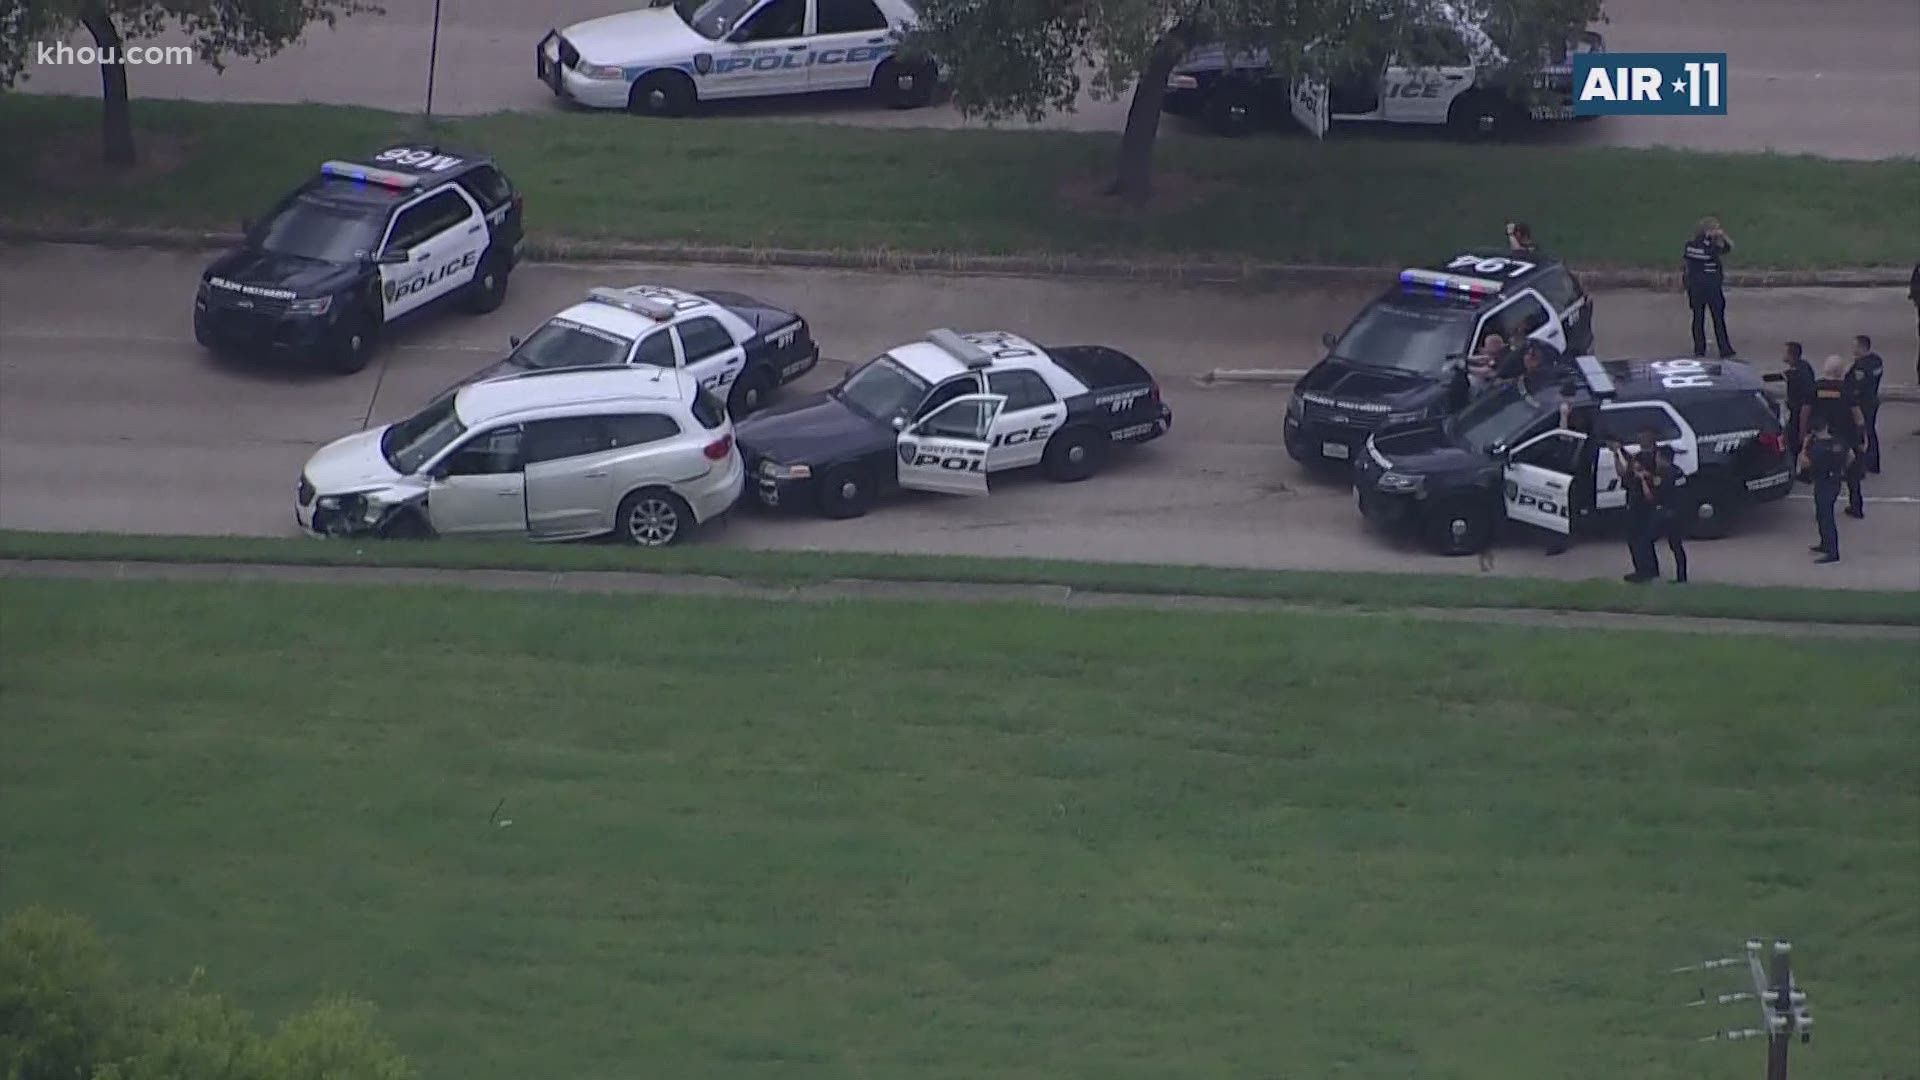 A robbery suspect led police on a chase that quickly turned into a standoff.